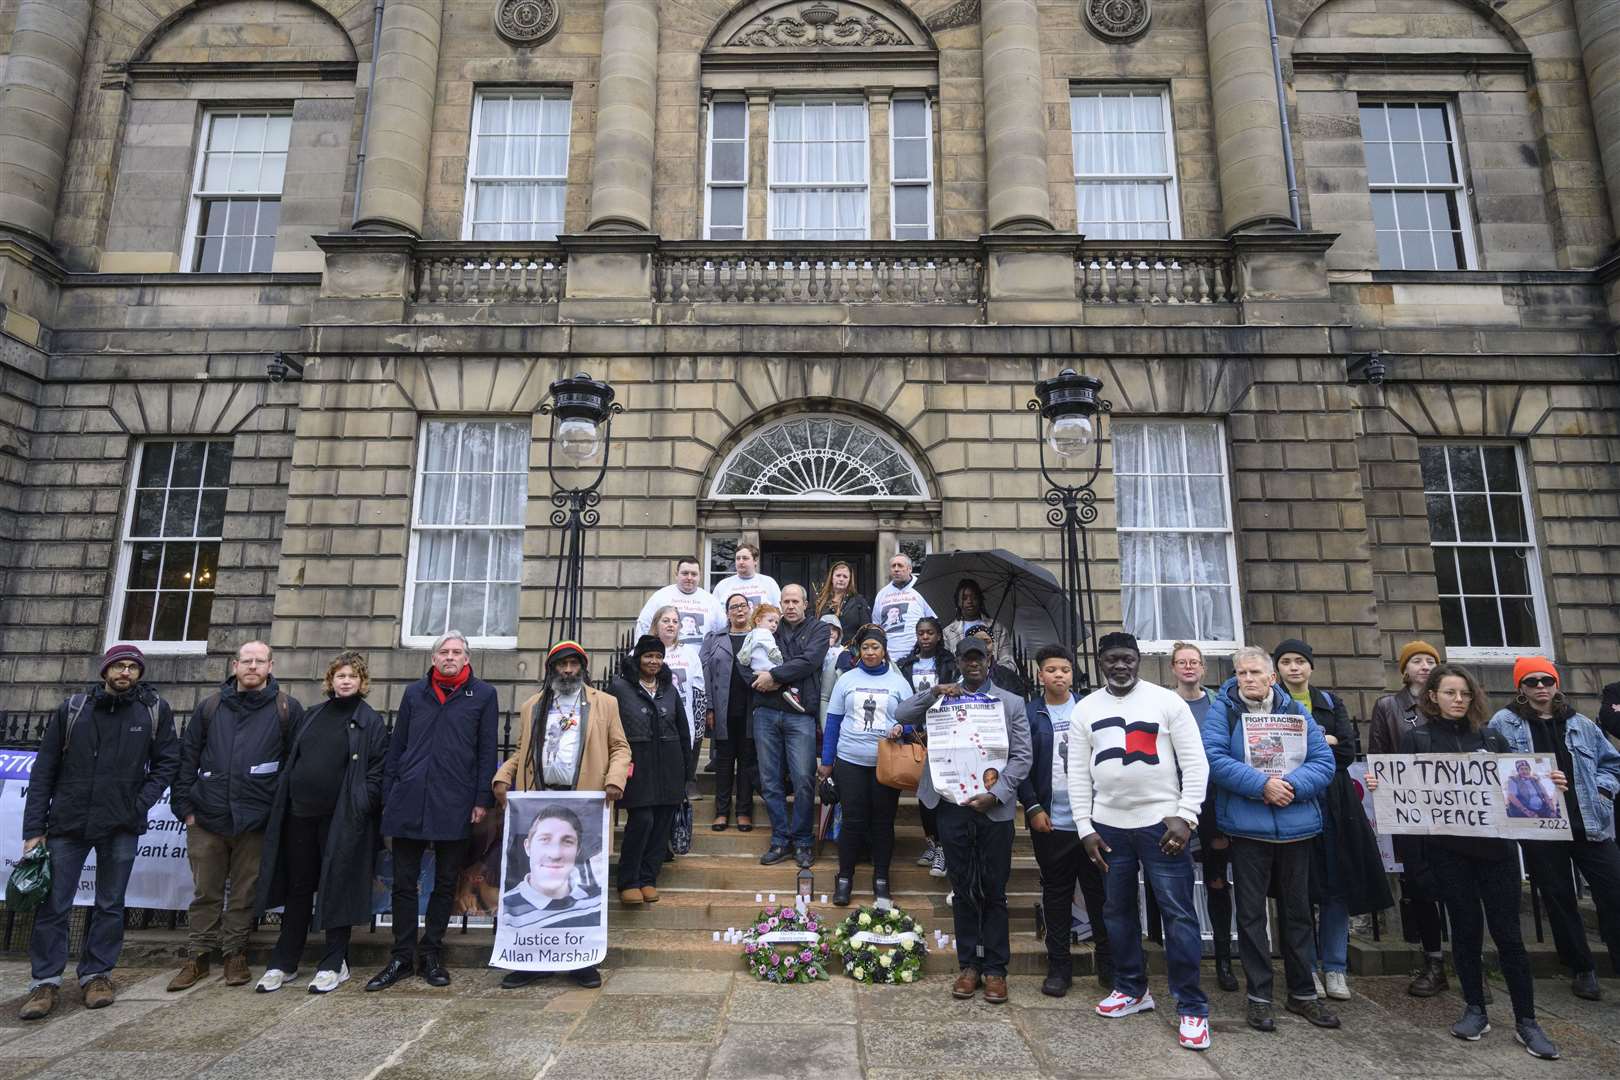 The families and supporters of Sheku Bayoh and Allan Marshall hold a remembrance vigil on the steps of Bute House (John Linton/PA)